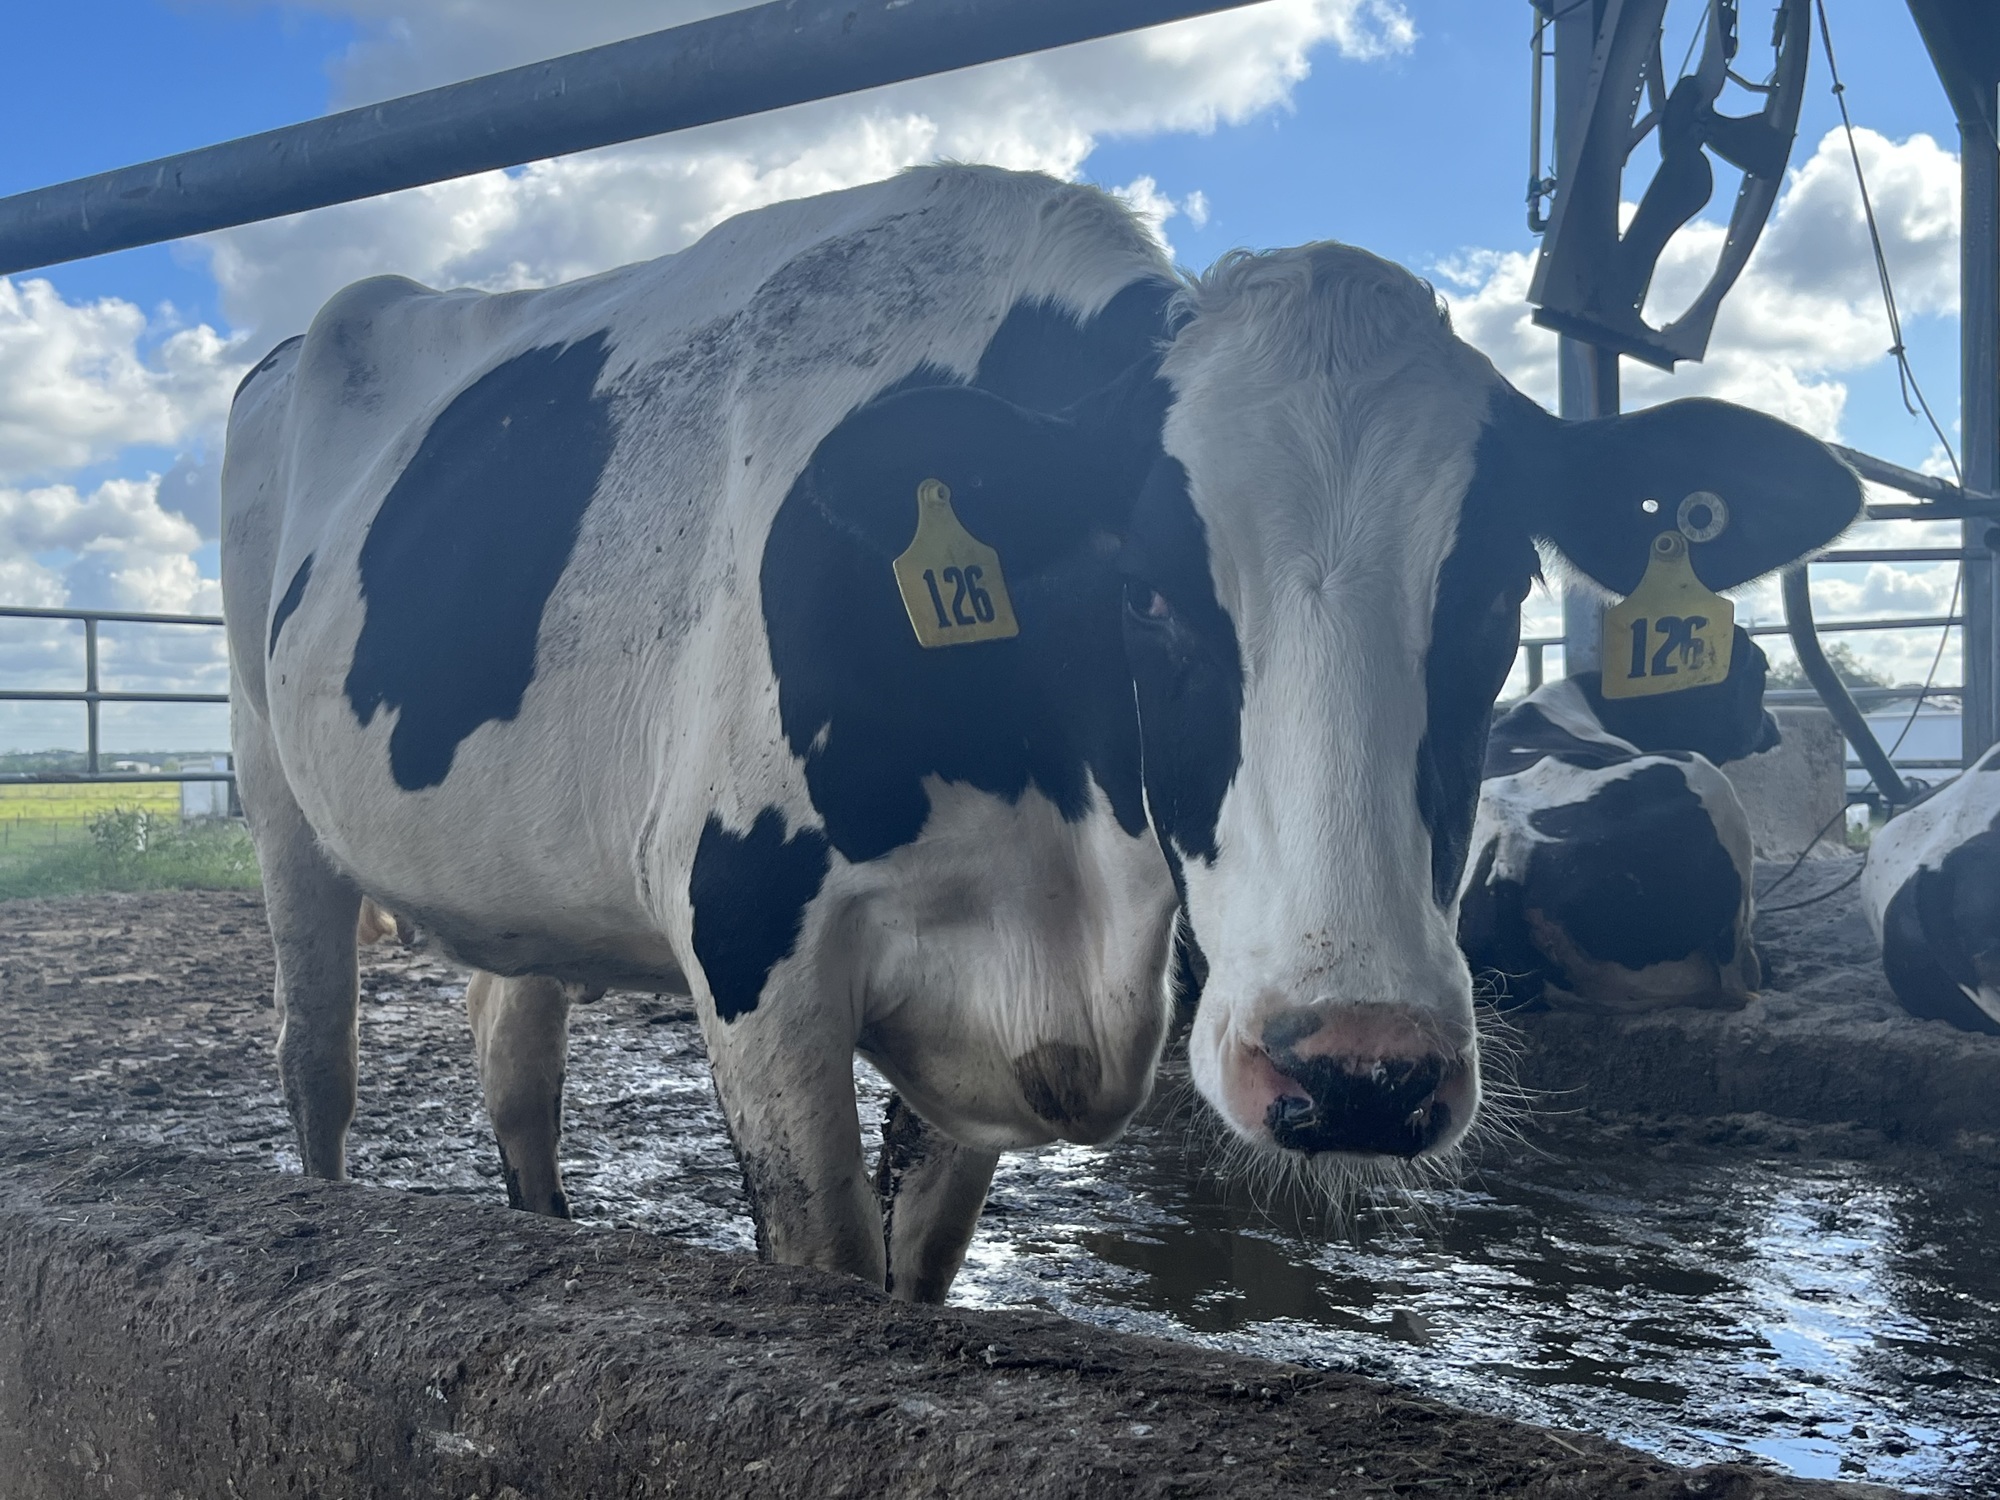 Dakin Dairy hopes to increase its herd from 1,800 cows to 2,300 in 2023. (Photo by Liz Ramos)